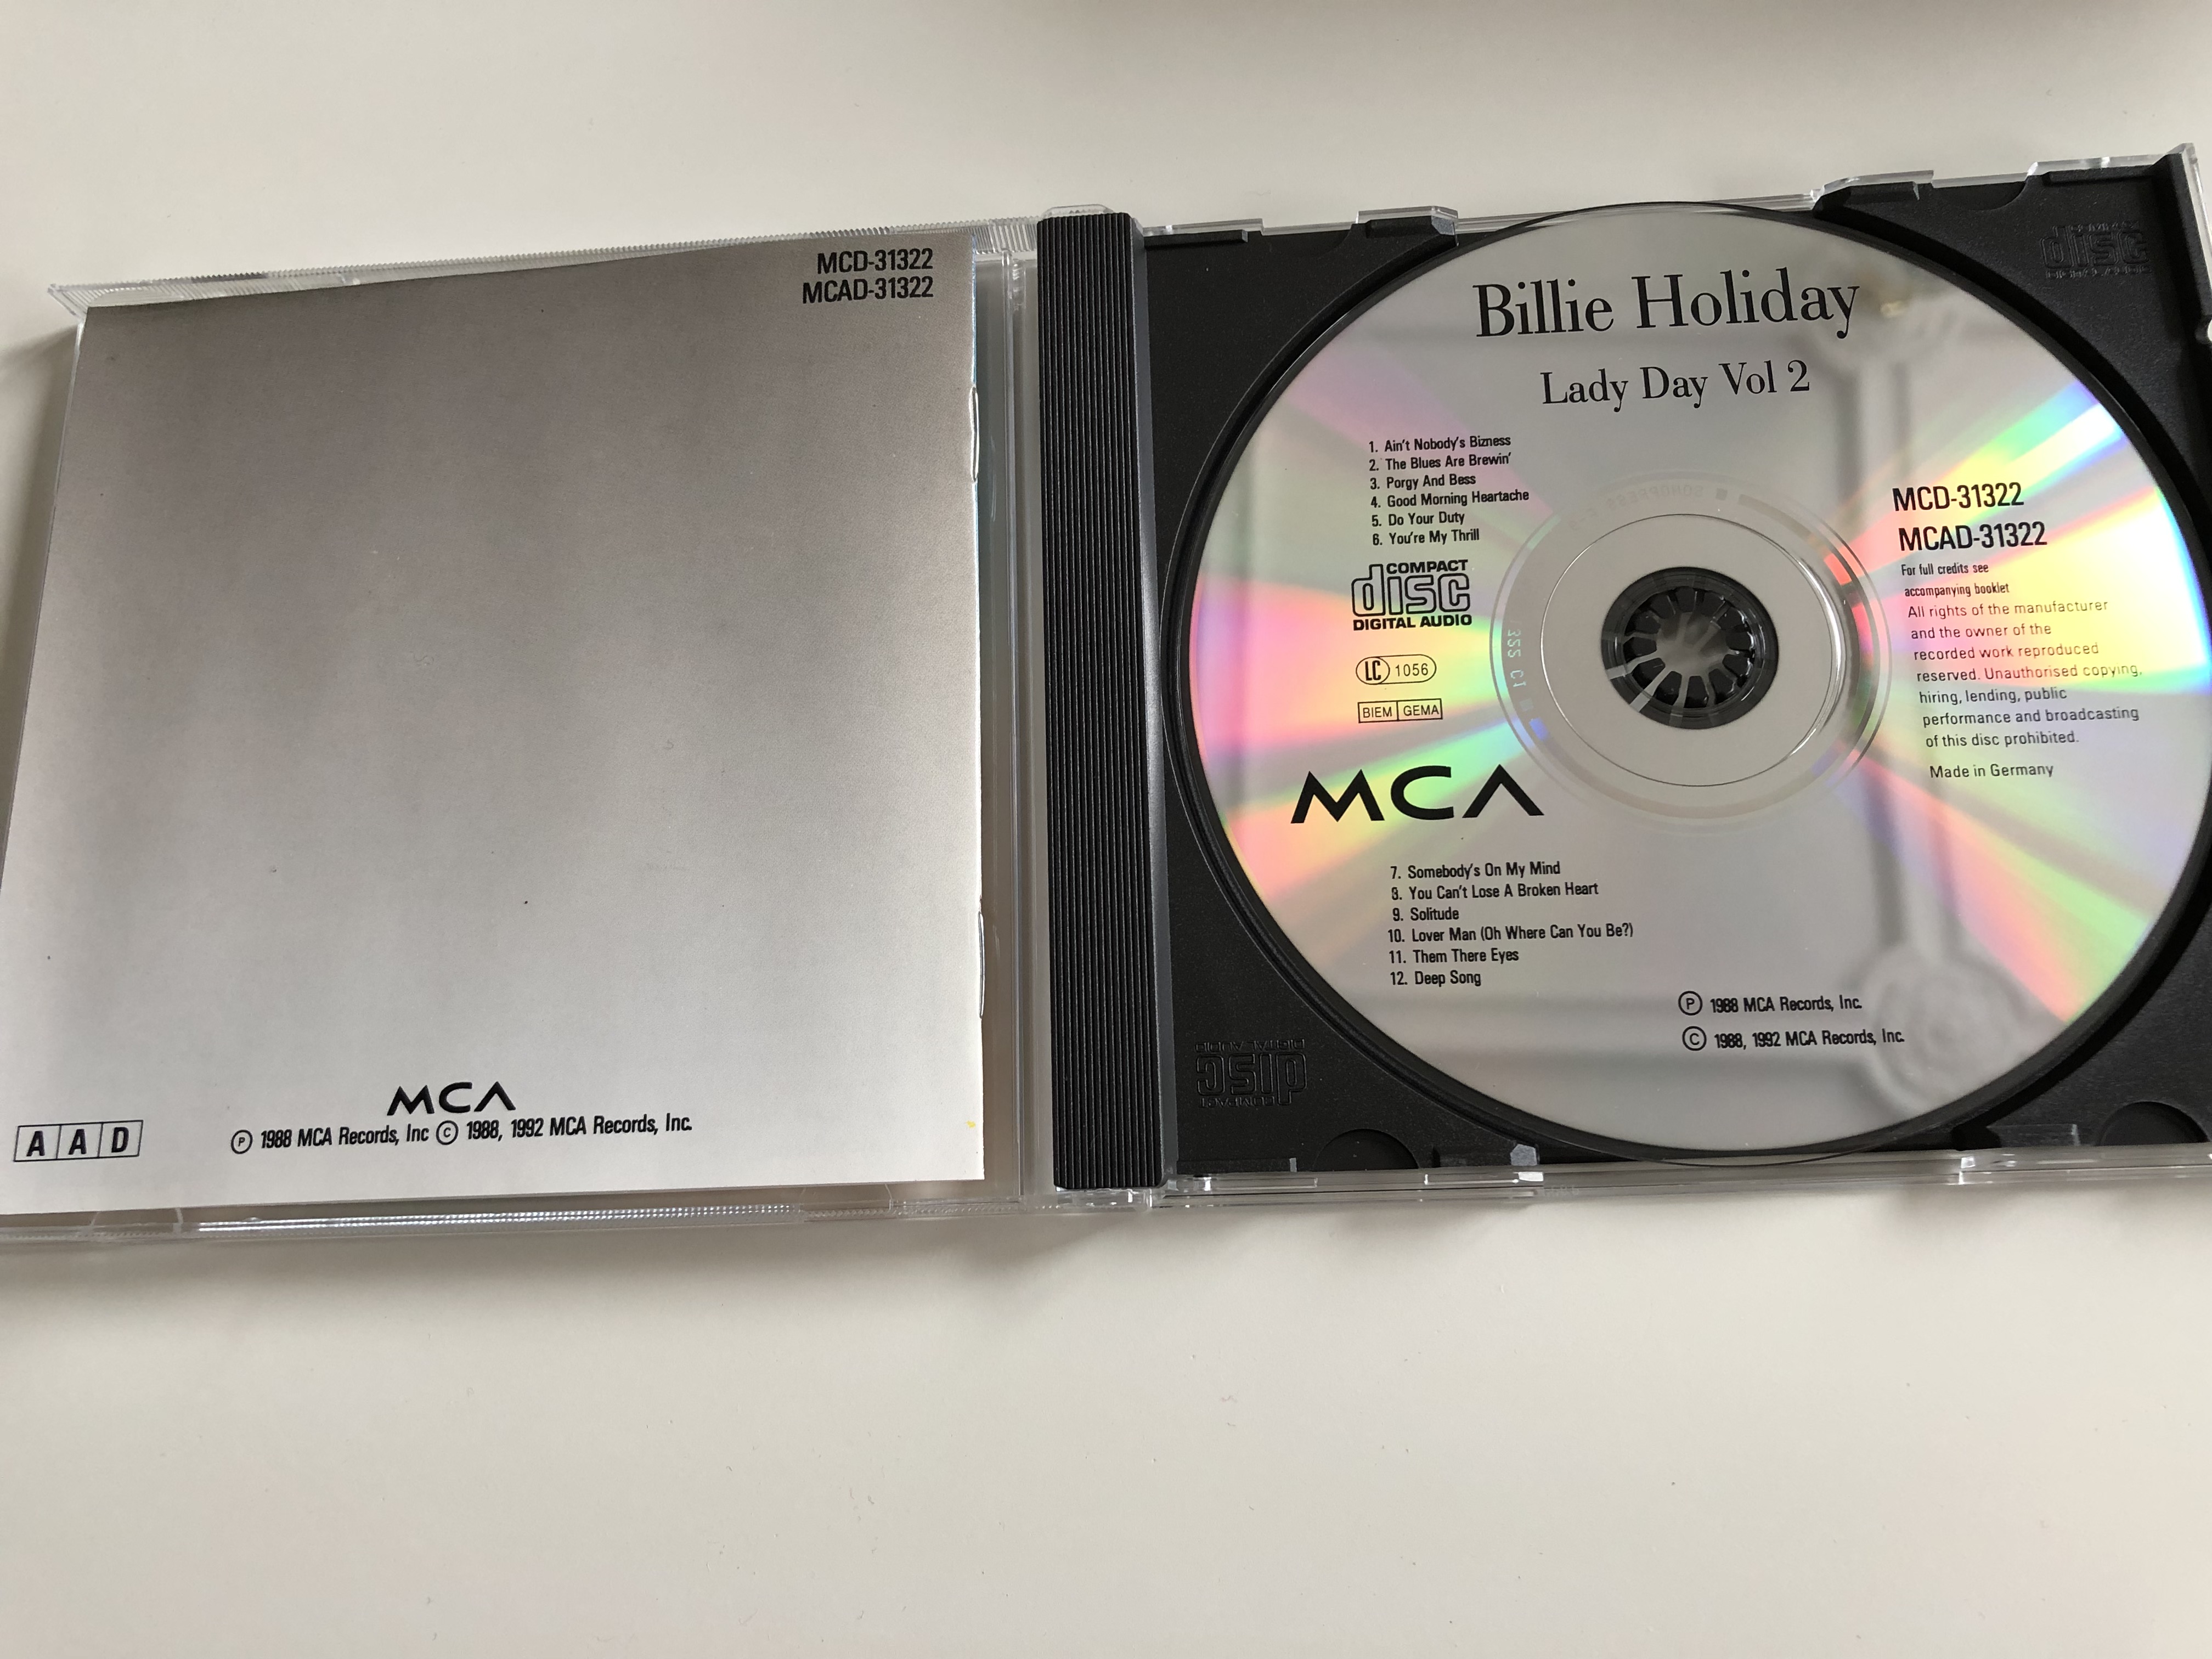 billie-holiday-lady-day-volume-two-mca-records-audio-cd-1988-mcd-31322-6-.jpg